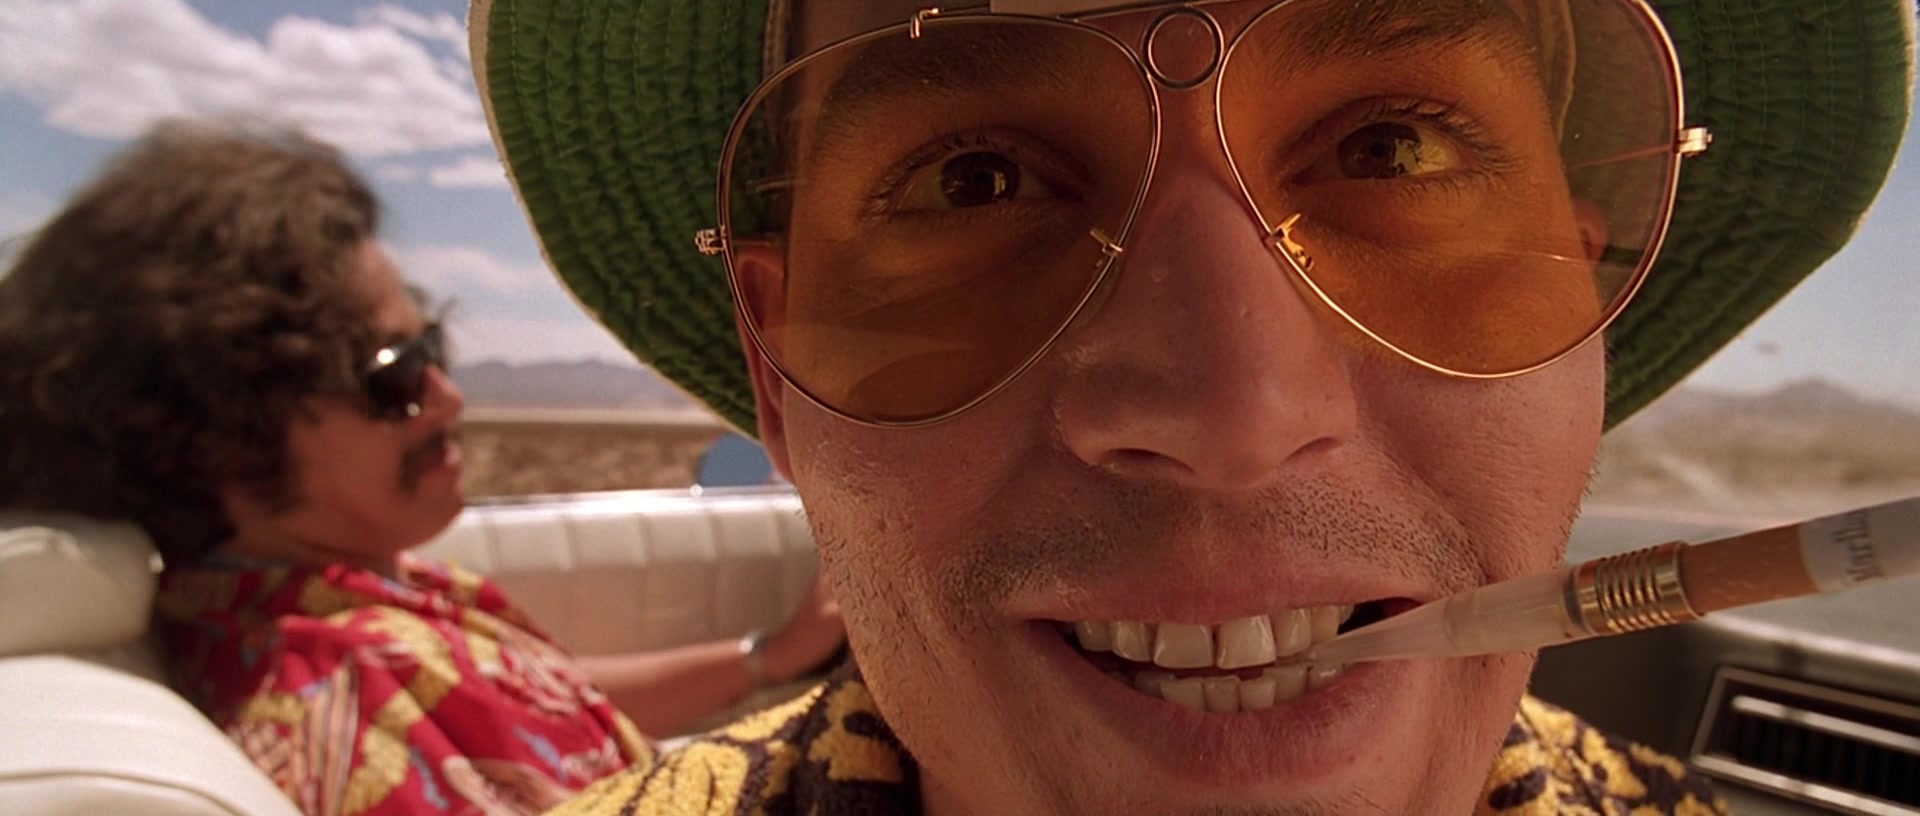 Ray-Ban Shooter RB3138 Aviator Sunglasses Worn by Johnny Depp in Fear and Loathing in ...1920 x 816